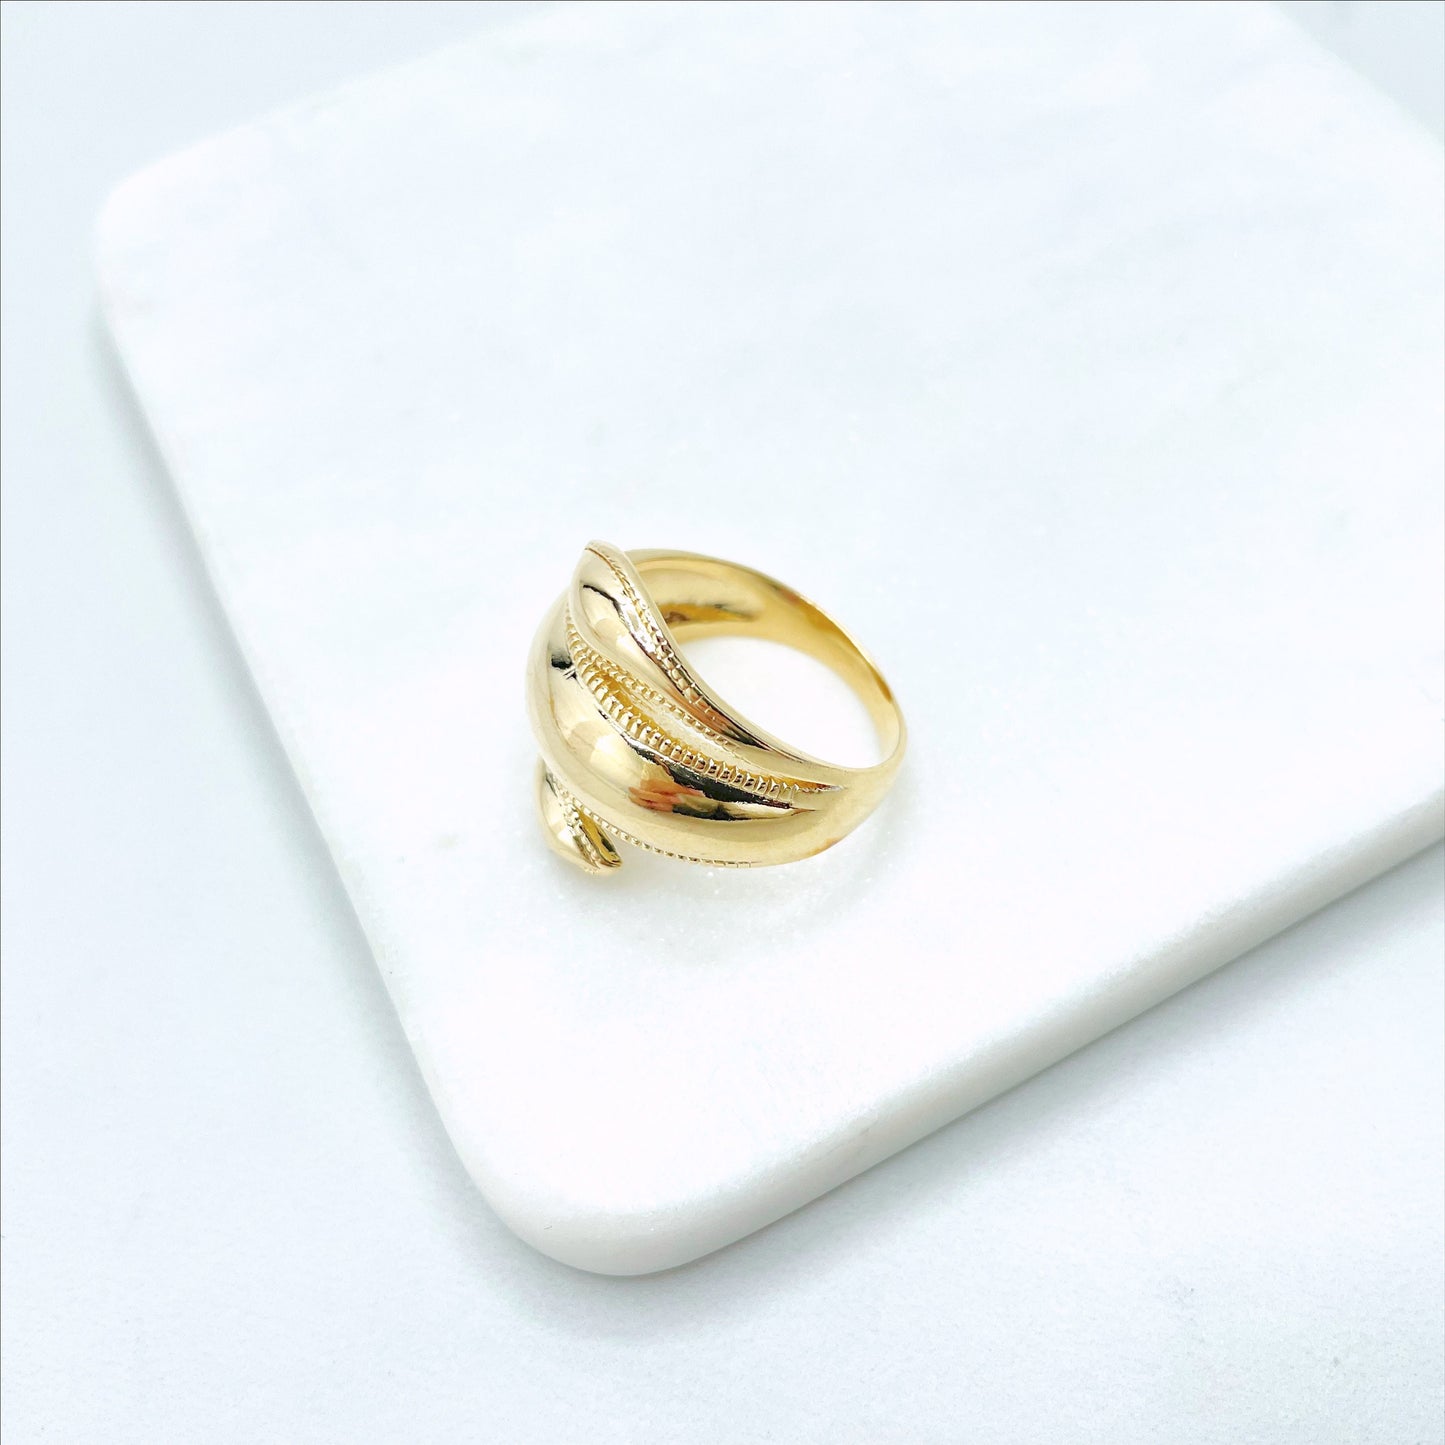 18k Gold Filled Simulated Stackable Ring, Elegant Texturized Details, Wholesale Jewelry Making Supplies